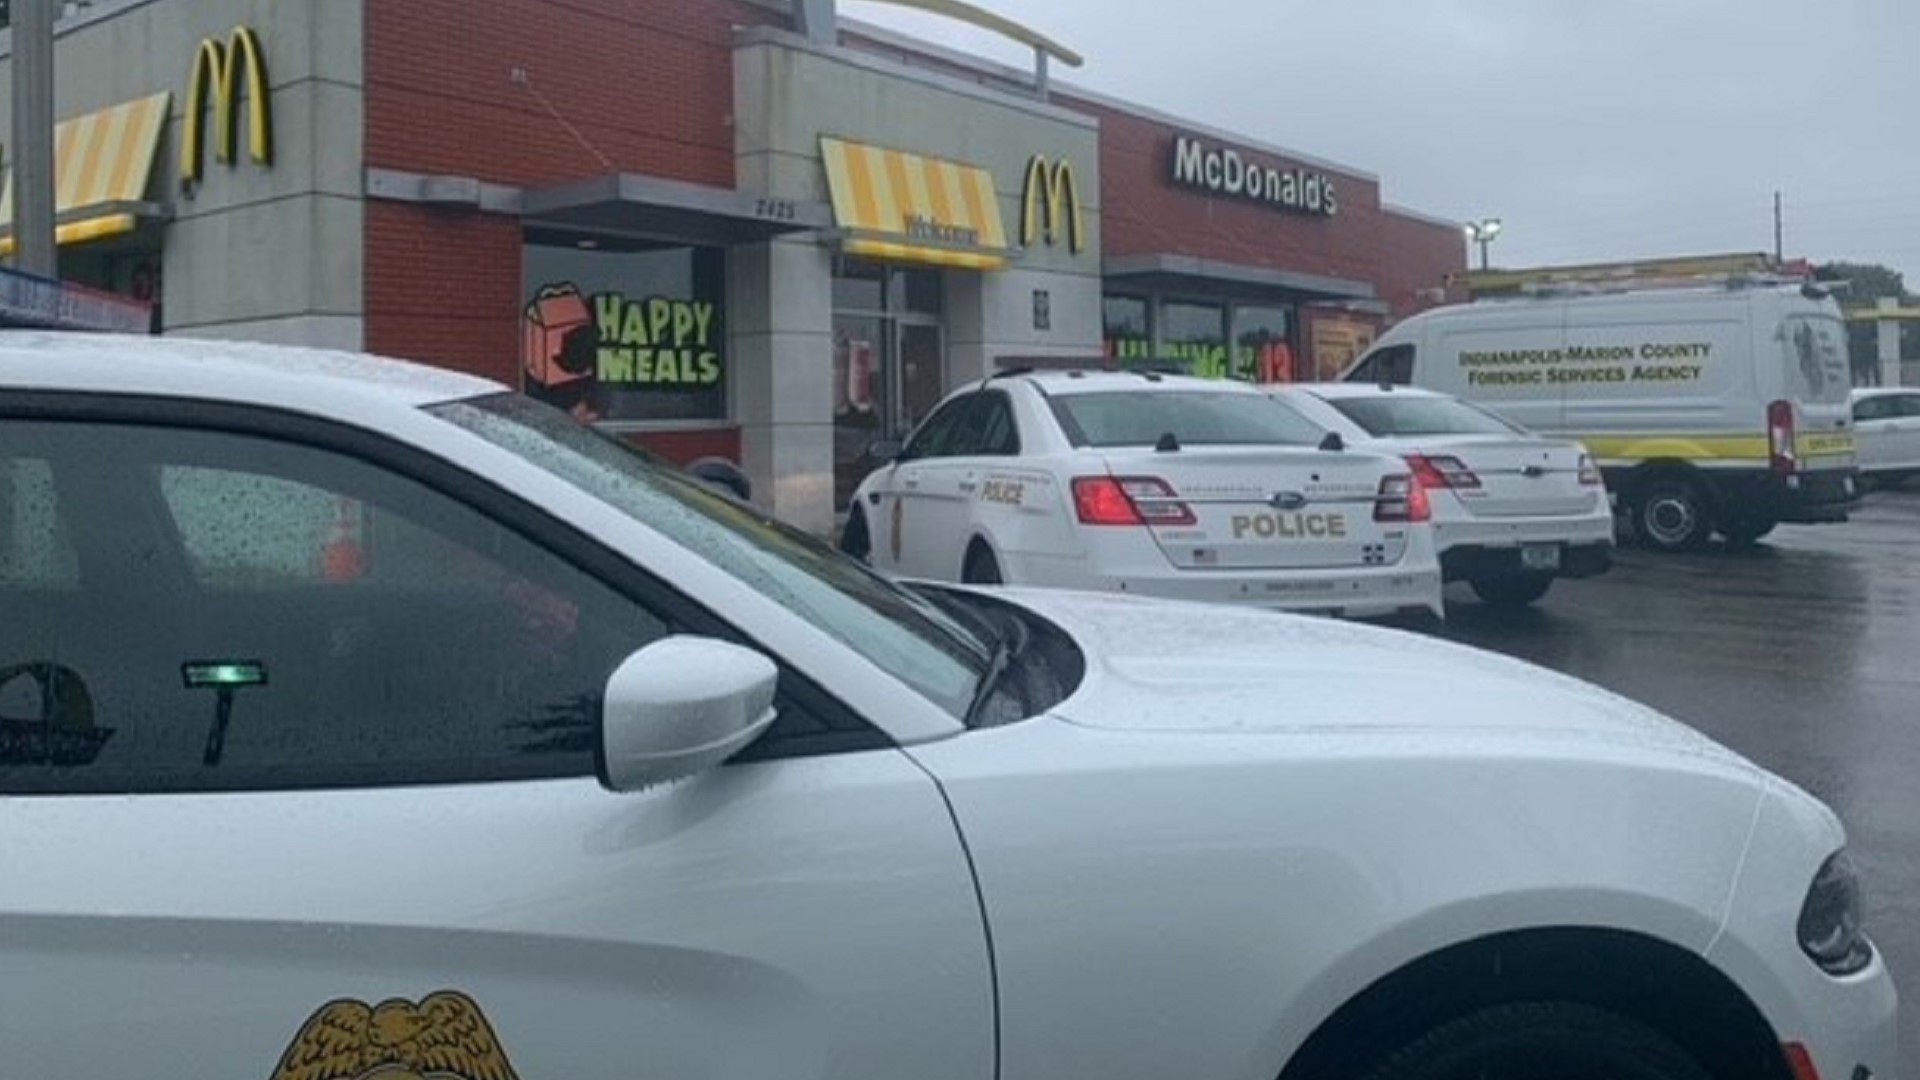 A shooting at the McDonalds at 38th Street and Keystone Avenue left two employees injured.